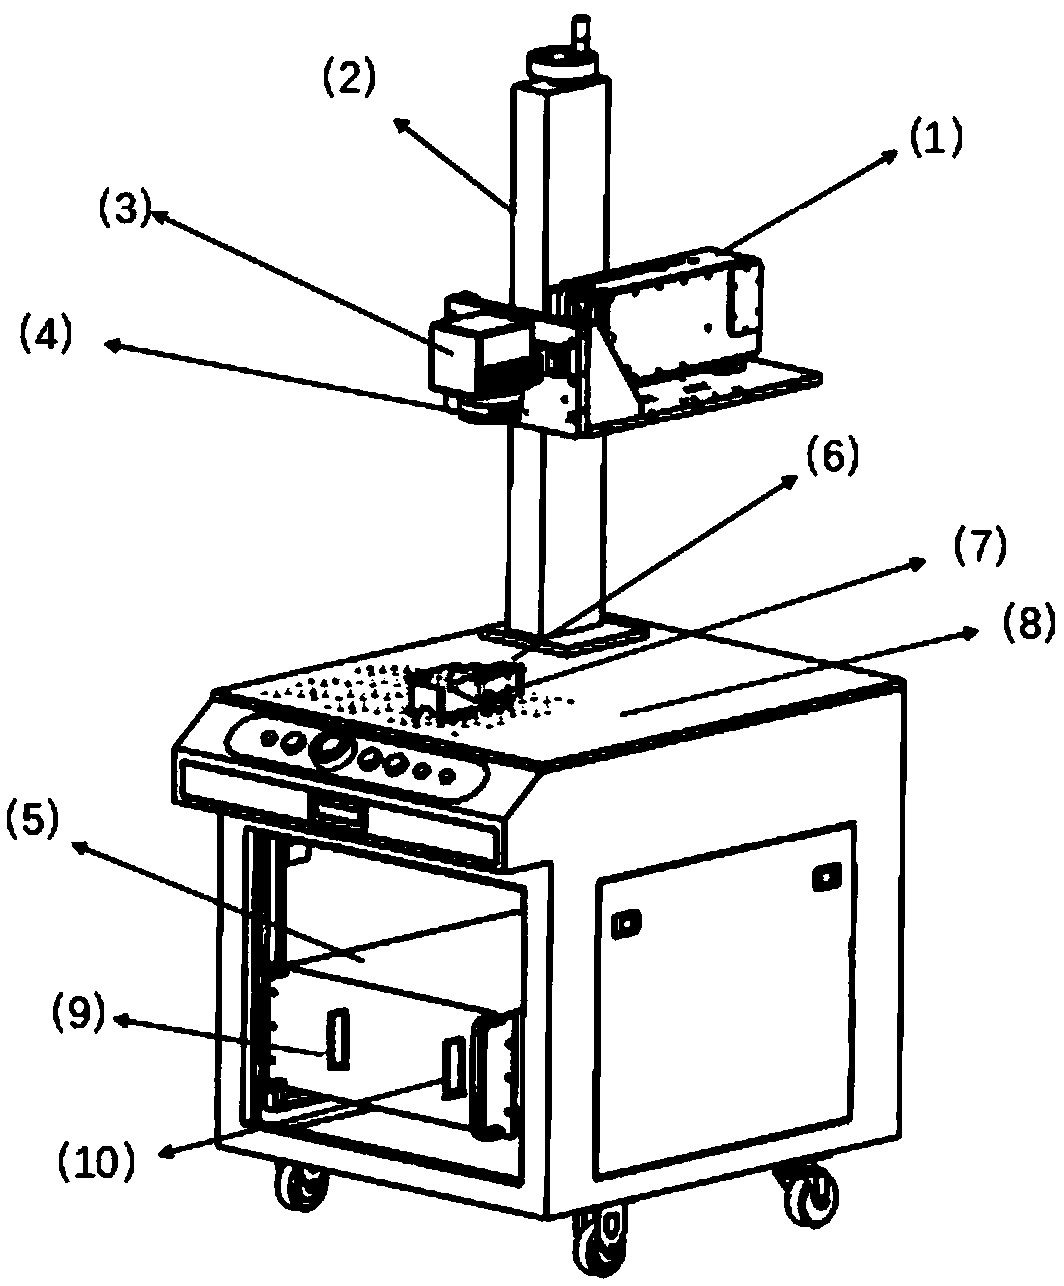 System and method for laser processing transparent material through passive zoom